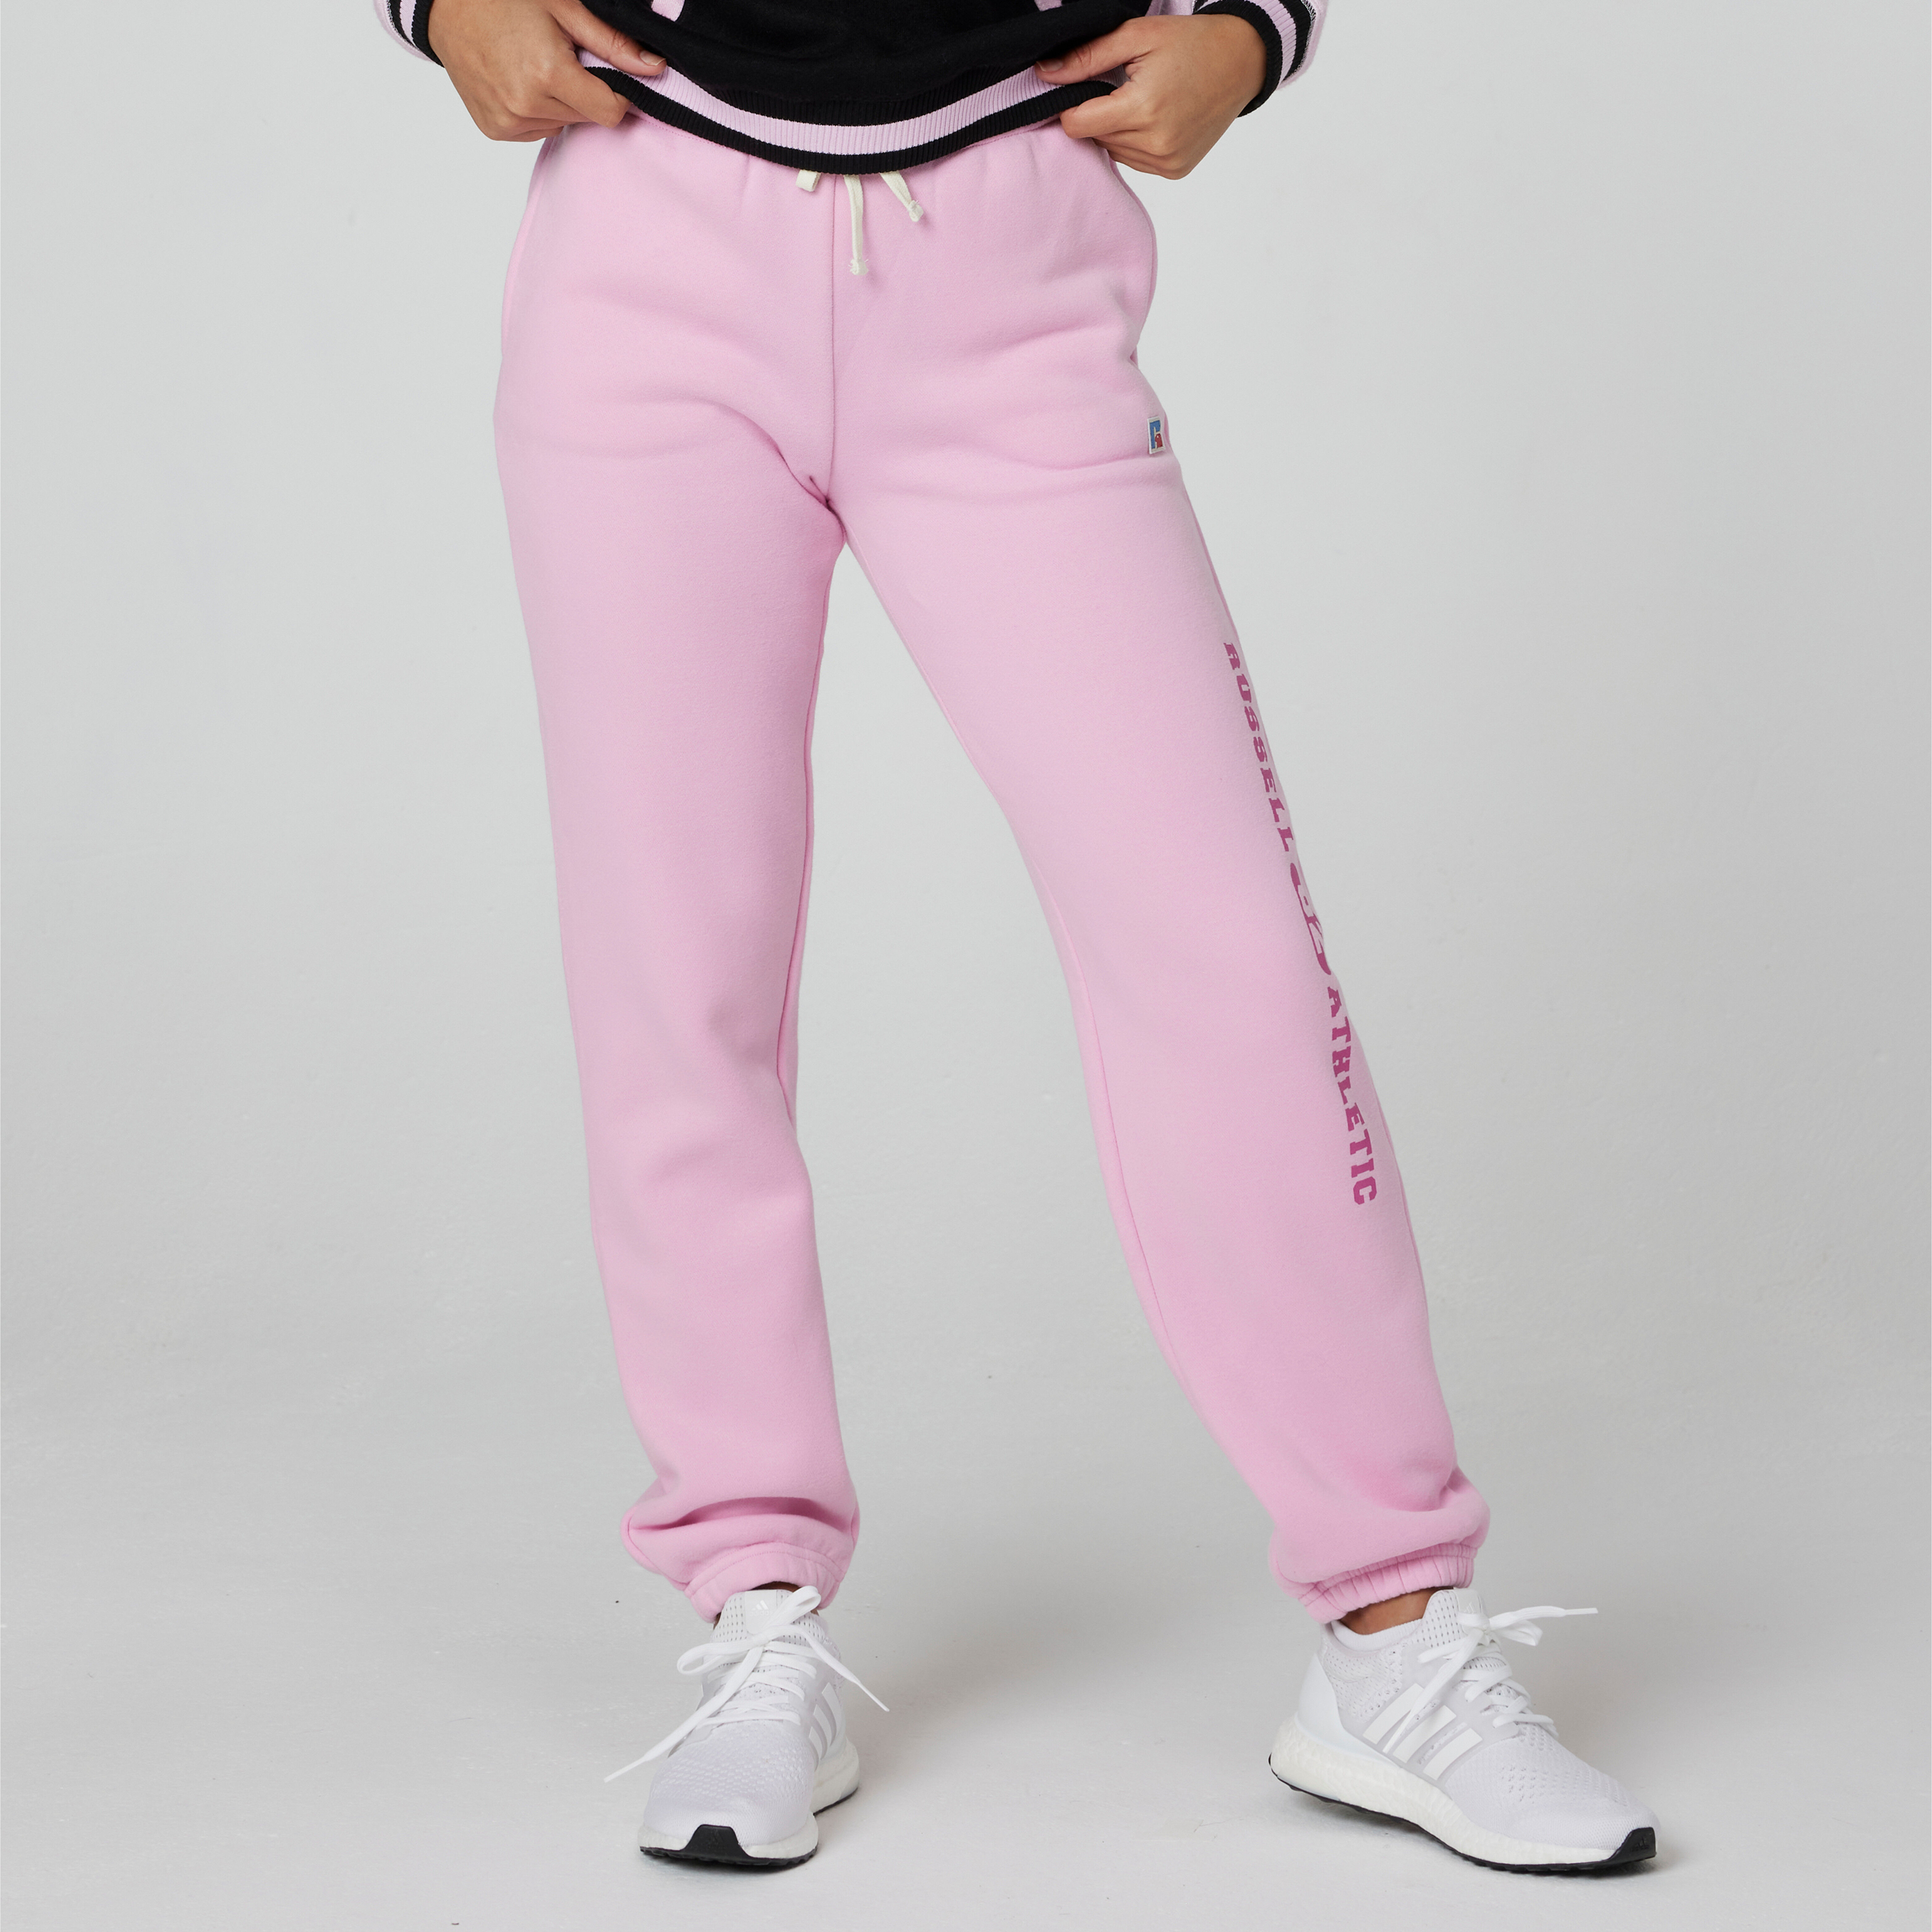 Women's Pants Athletic Clothing | Nordstrom